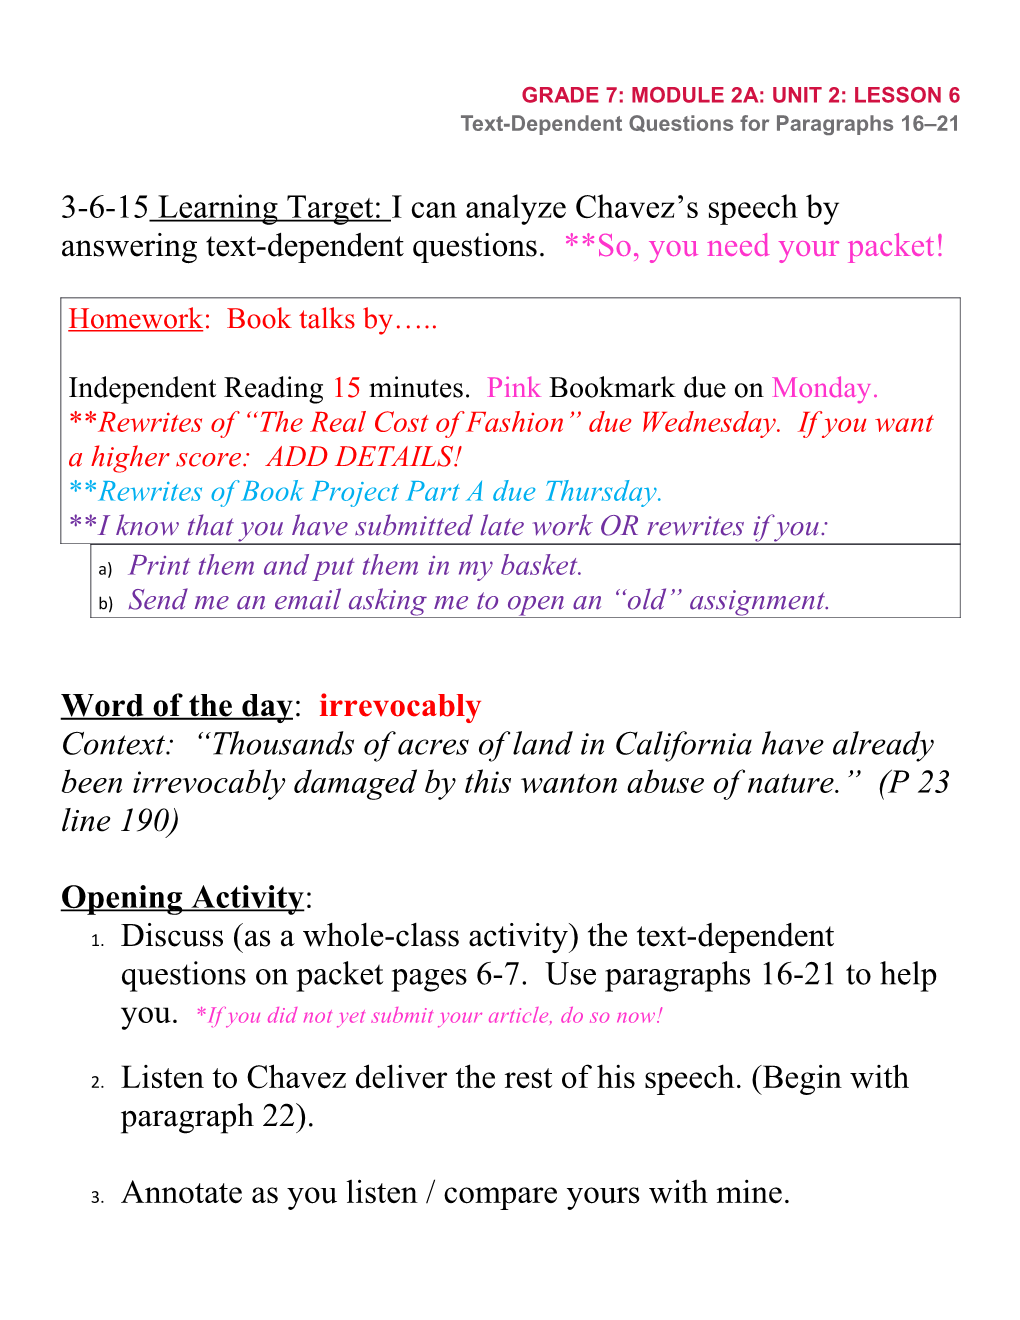 3-6-15 Learning Target: I Can Analyze Chavez S Speech by Answering Text-Dependent Questions